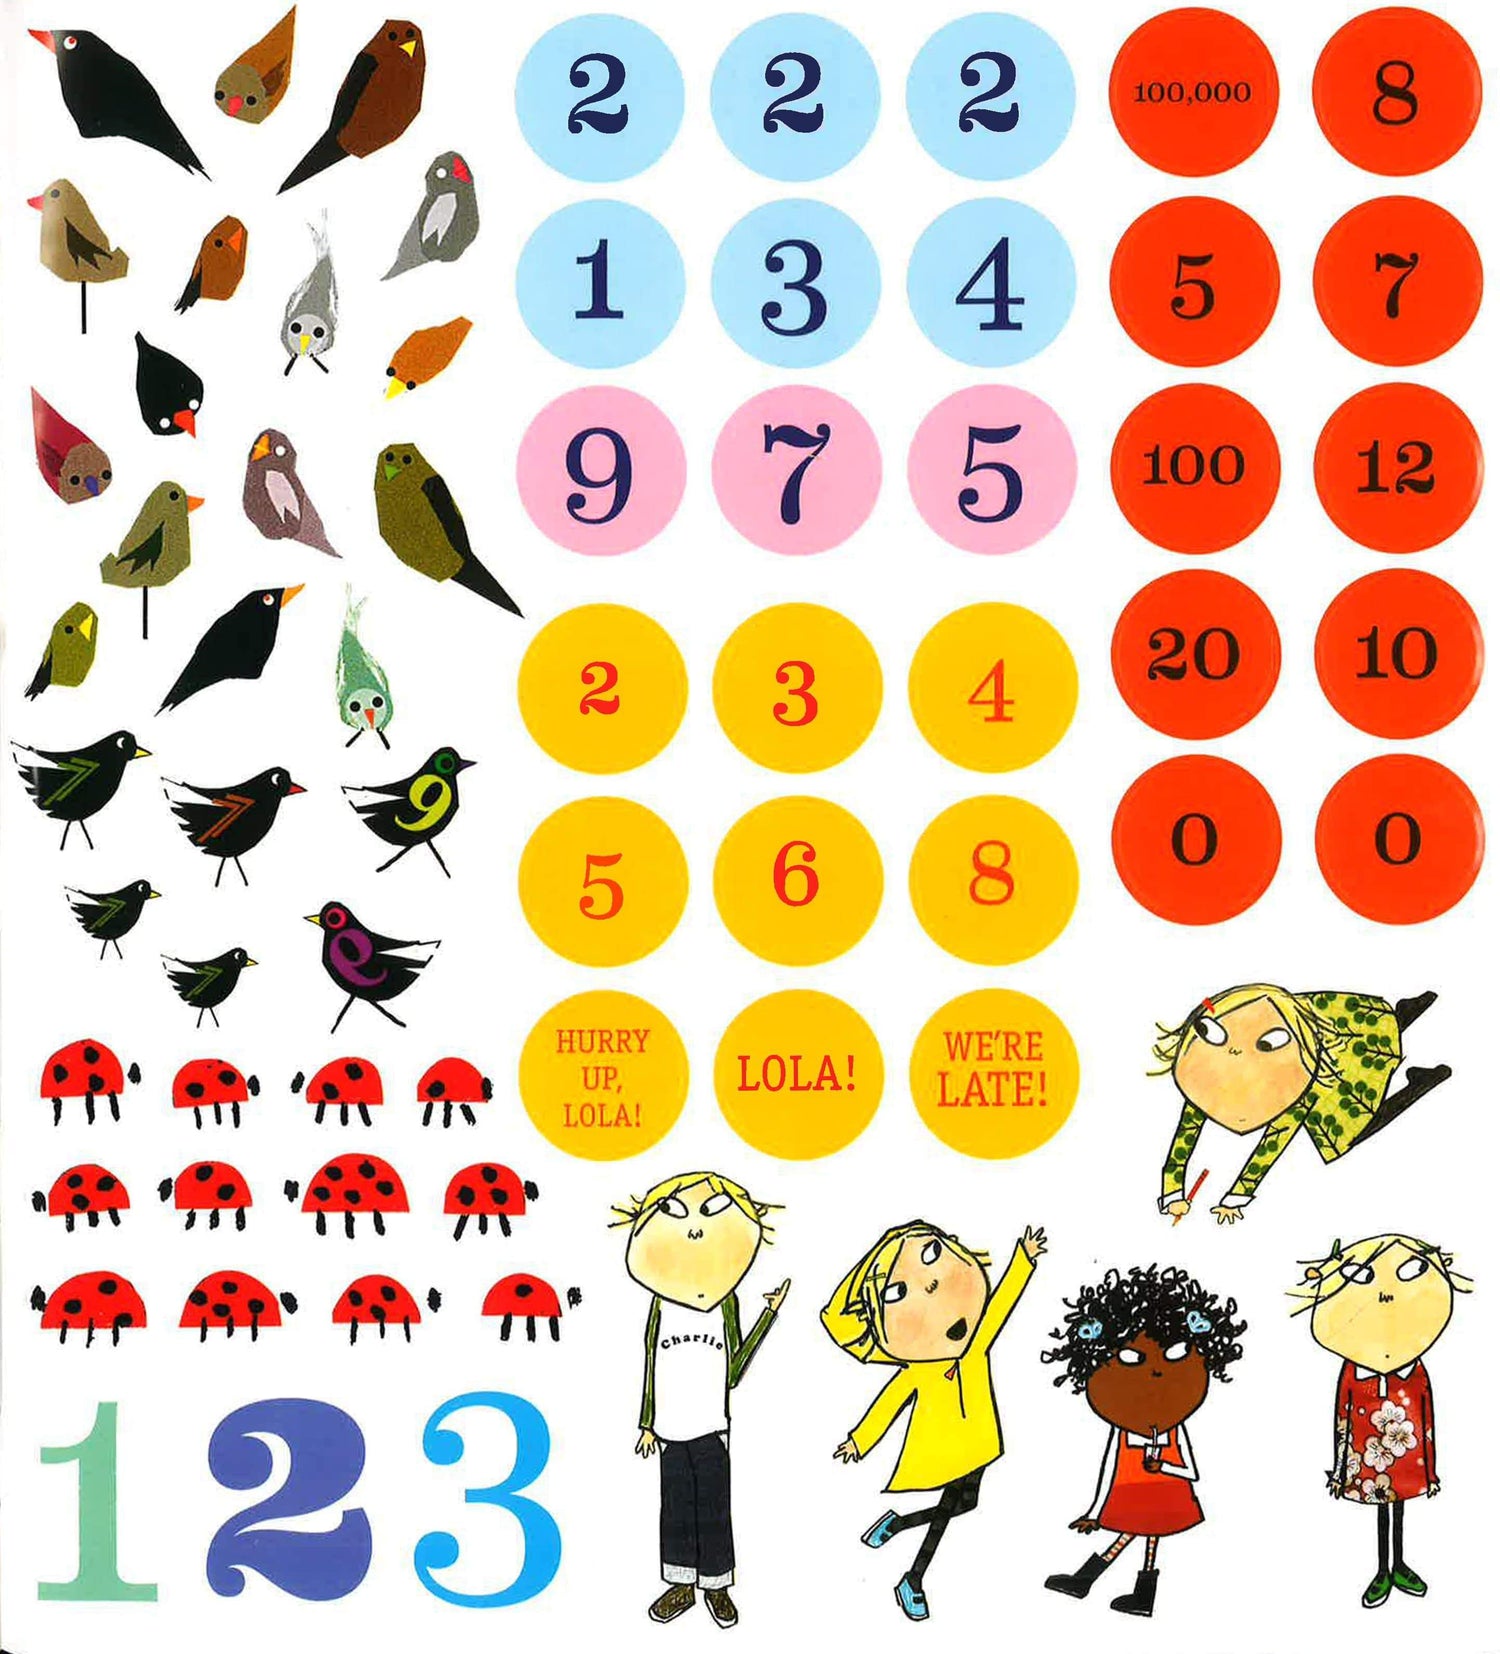 Charlie & Lola: Exactly One Numbers Sticker Activity Book